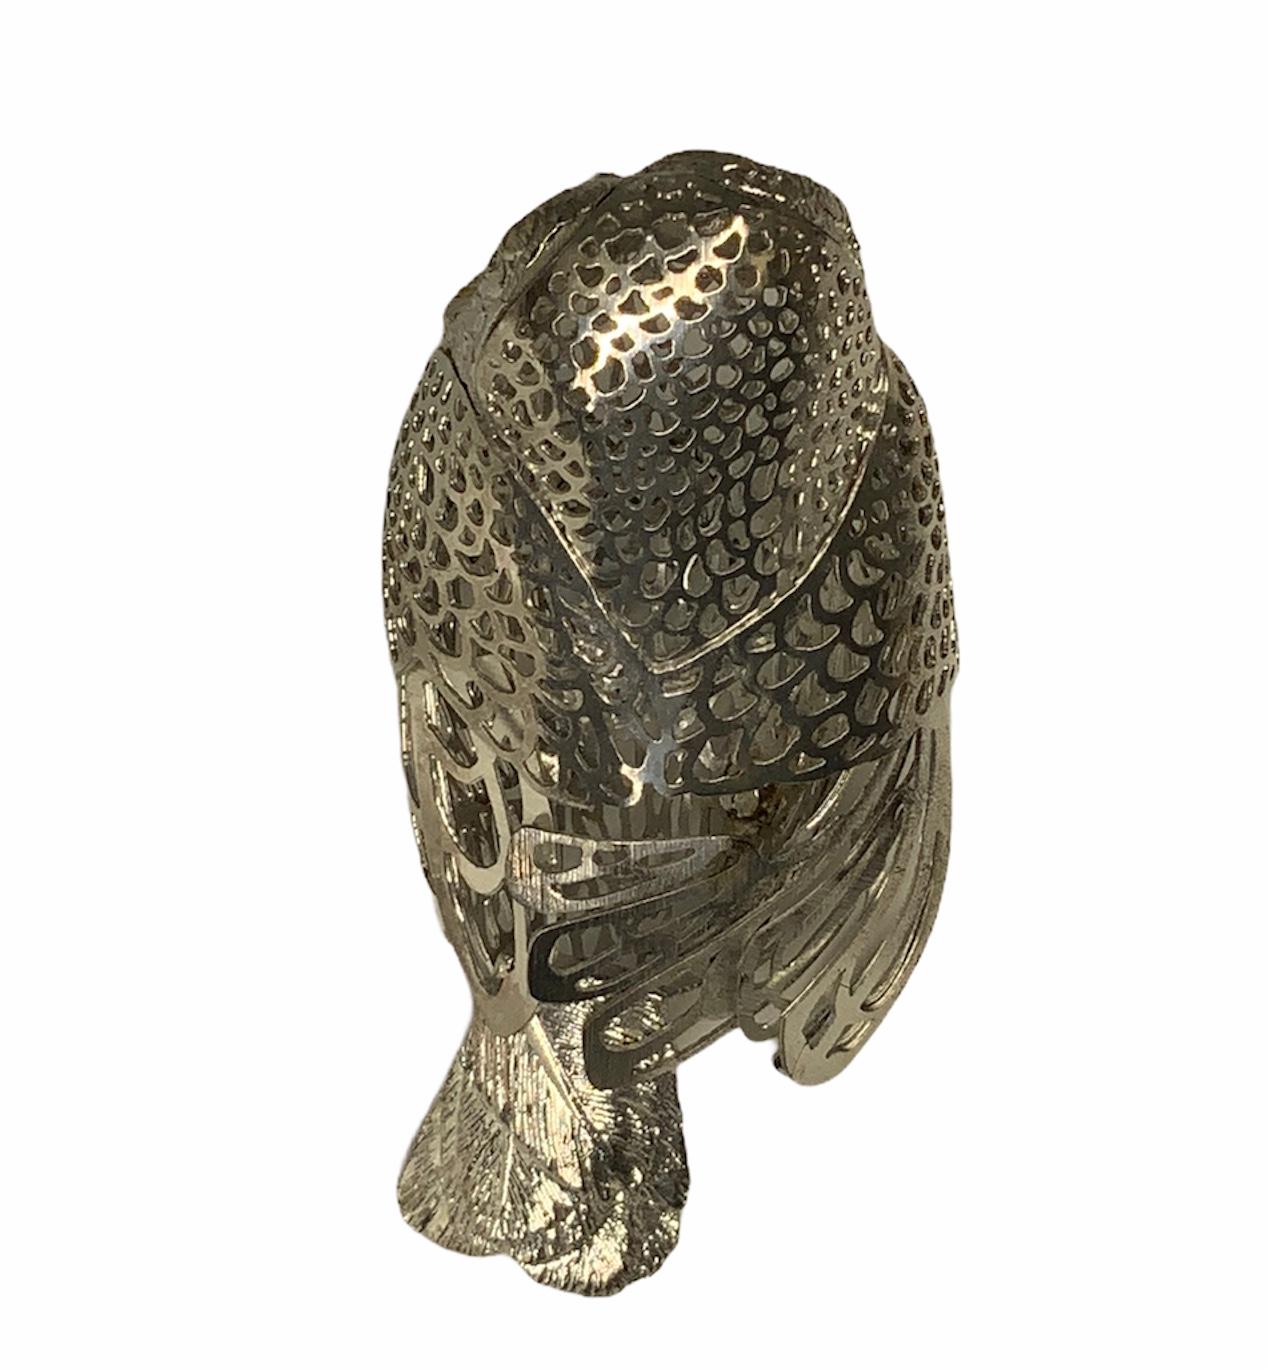 This is a Christofle silver plated lumiere “curious” owl figurine. Its whole body is reticulated and its pair of eyes are highlighted by onyx like enamel beads surrounded by gold tone metal. The Christofle hallmark is in its feather tail. This is